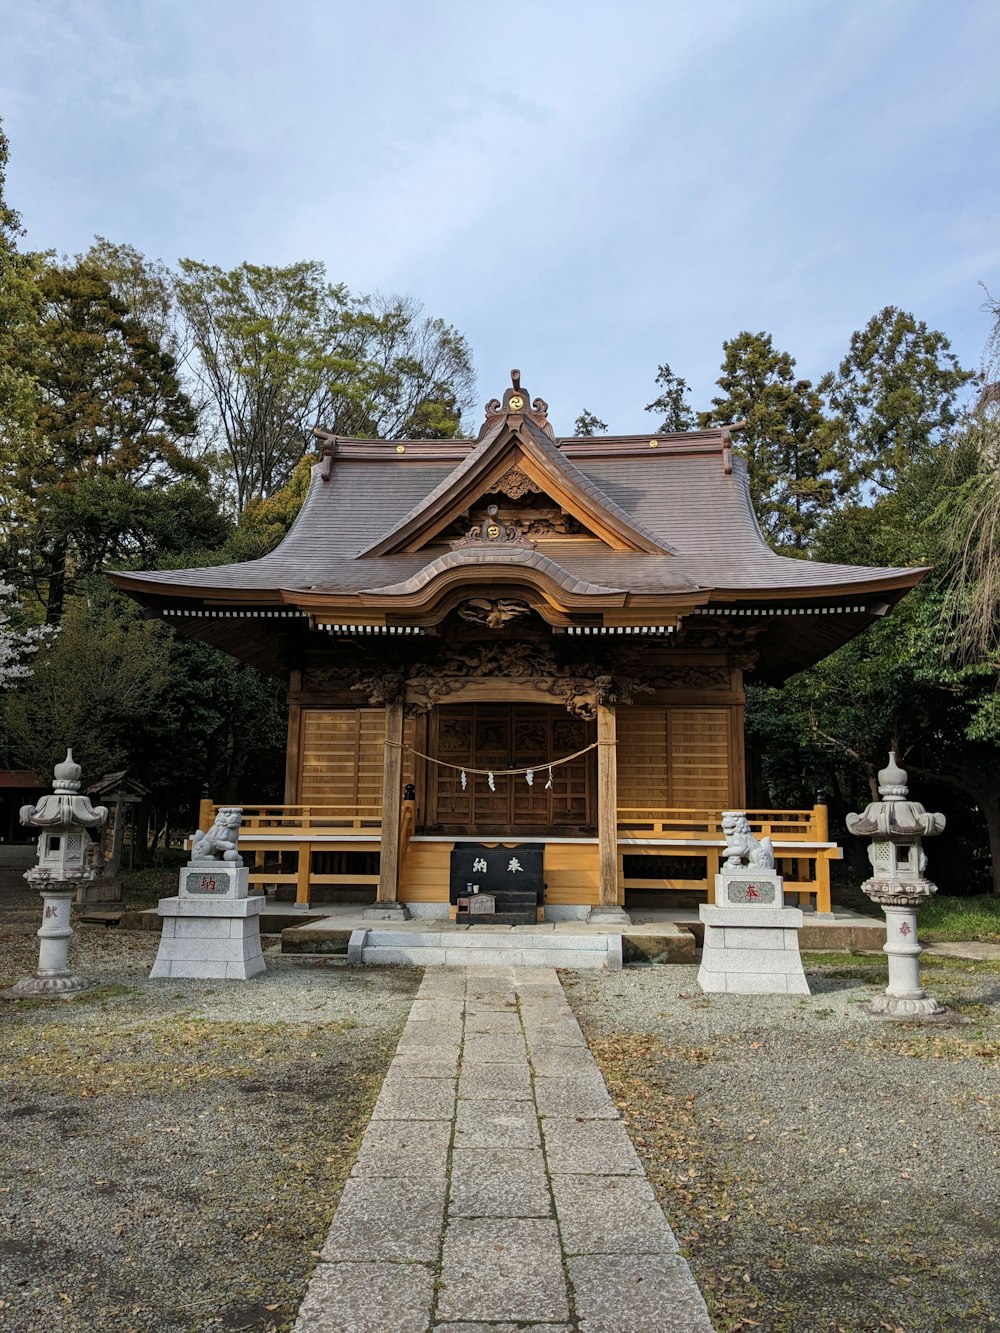 a small wooden structure with statues in front of it